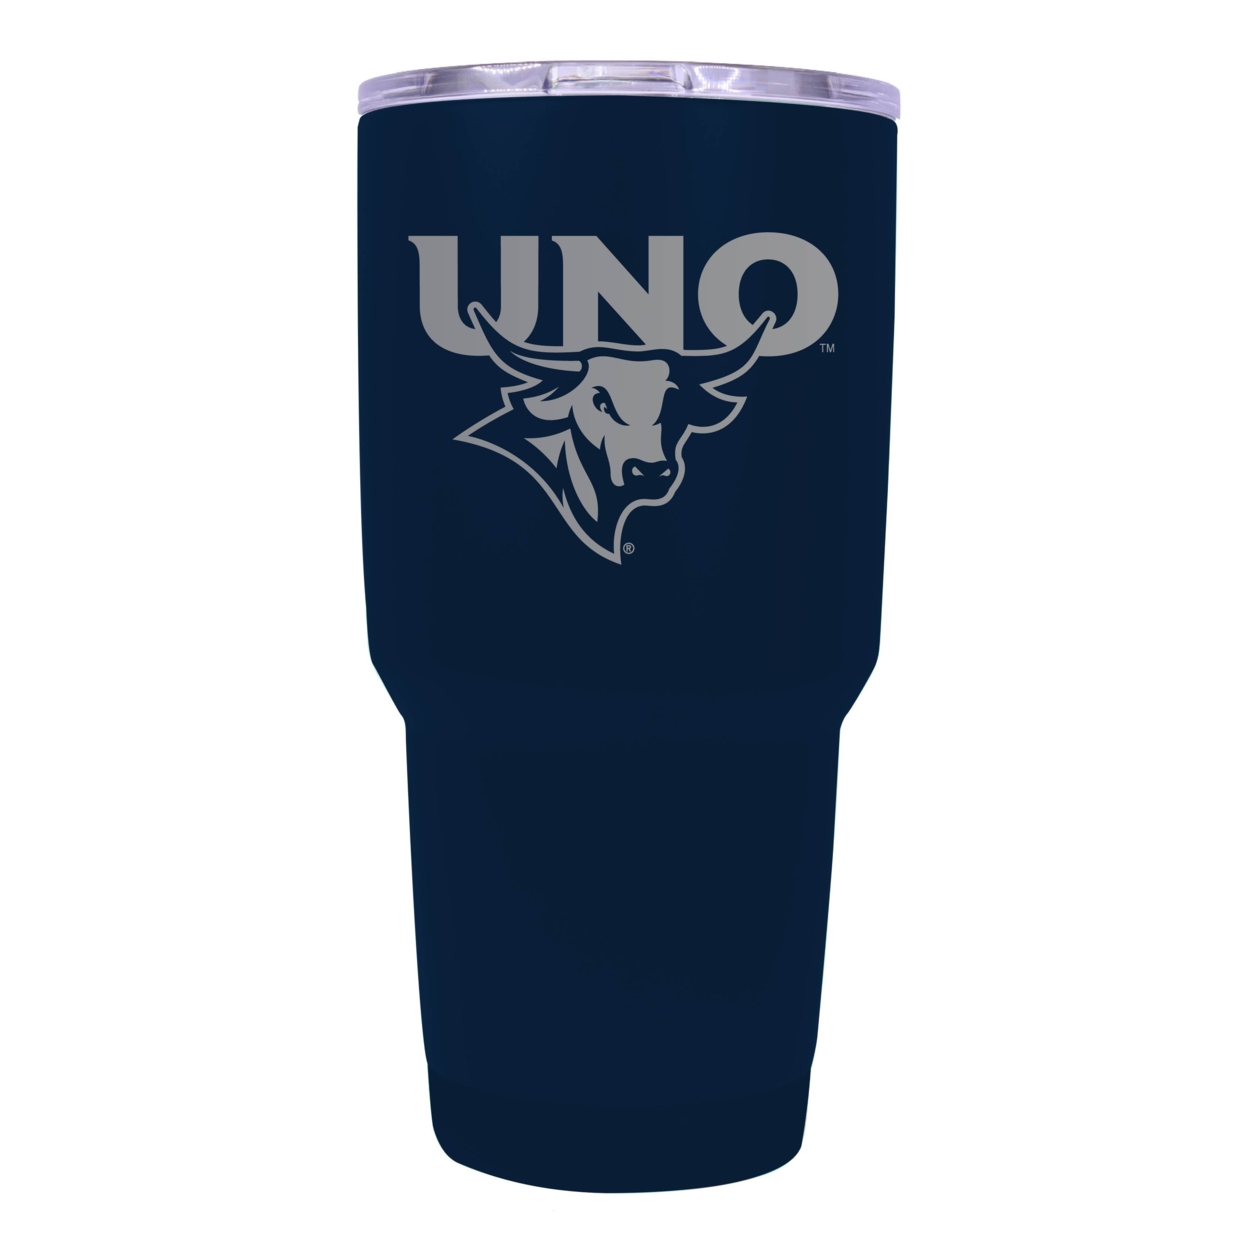 Nebraska At Omaha 24 Oz Laser Engraved Stainless Steel Insulated Tumbler - Choose Your Color. - Red